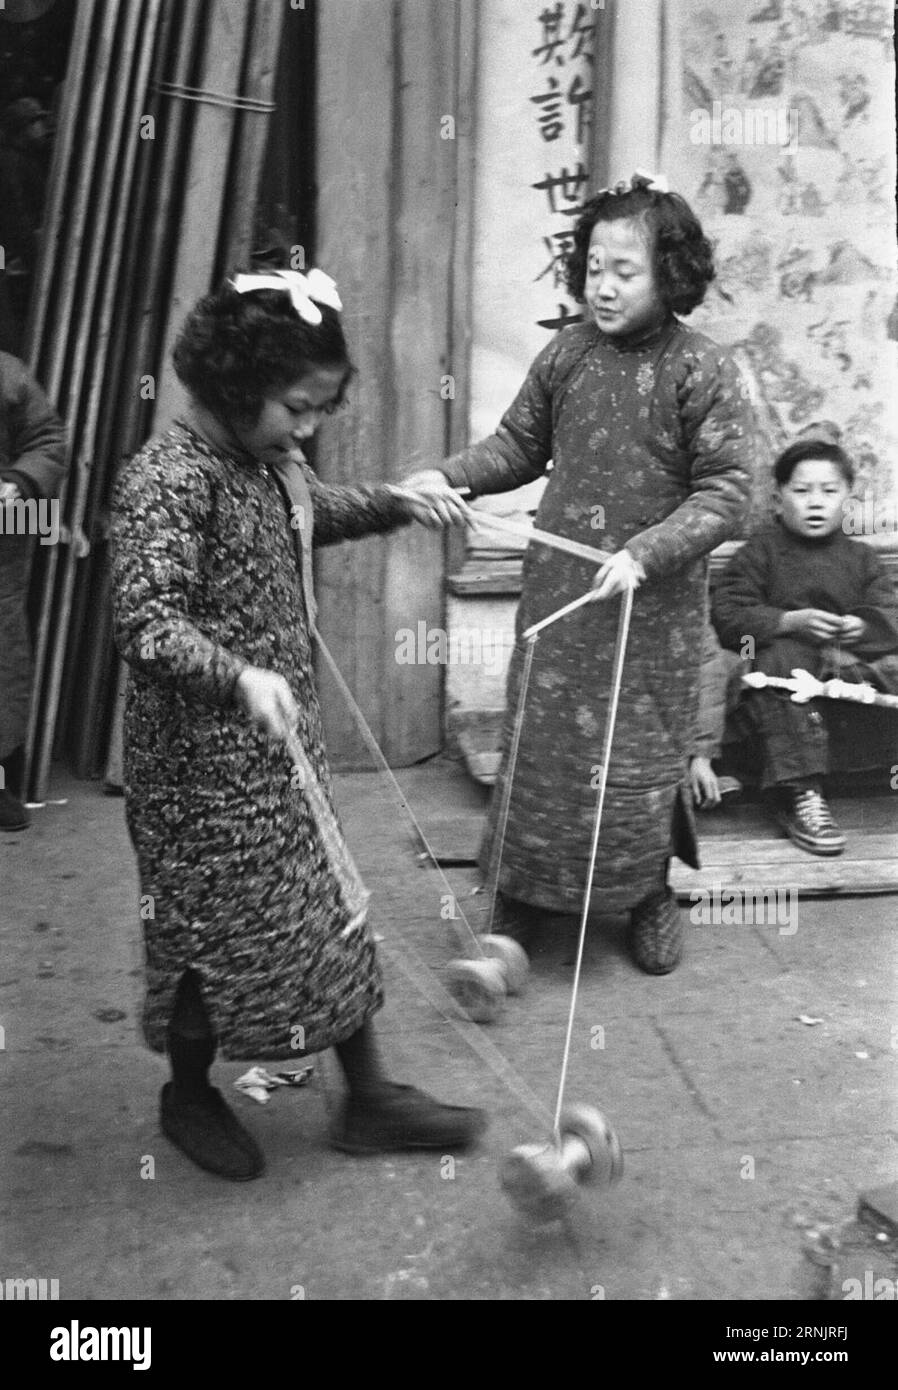 (170211) -- BEIJING, Feb. 11, 2017 -- Two children play diabolos at Shanghai, east China, during spring festival, 1948. Spring Festival or the Lunar New Year is the most significant holiday for Chinese. Except for reuniting with family members, they take part in fun activities to celebrate. This year, the Spring Festival starts from Jan. 28. (wsw) CHINA-SPRING FESTIVAL-FUN ACTIVITIES (CN) Xinhuashe PUBLICATIONxNOTxINxCHN   Beijing Feb 11 2017 Two Children Play Pellets AT Shanghai East China during Spring Festival 1948 Spring Festival or The Lunar New Year IS The Most significant Holiday for Ch Stock Photo